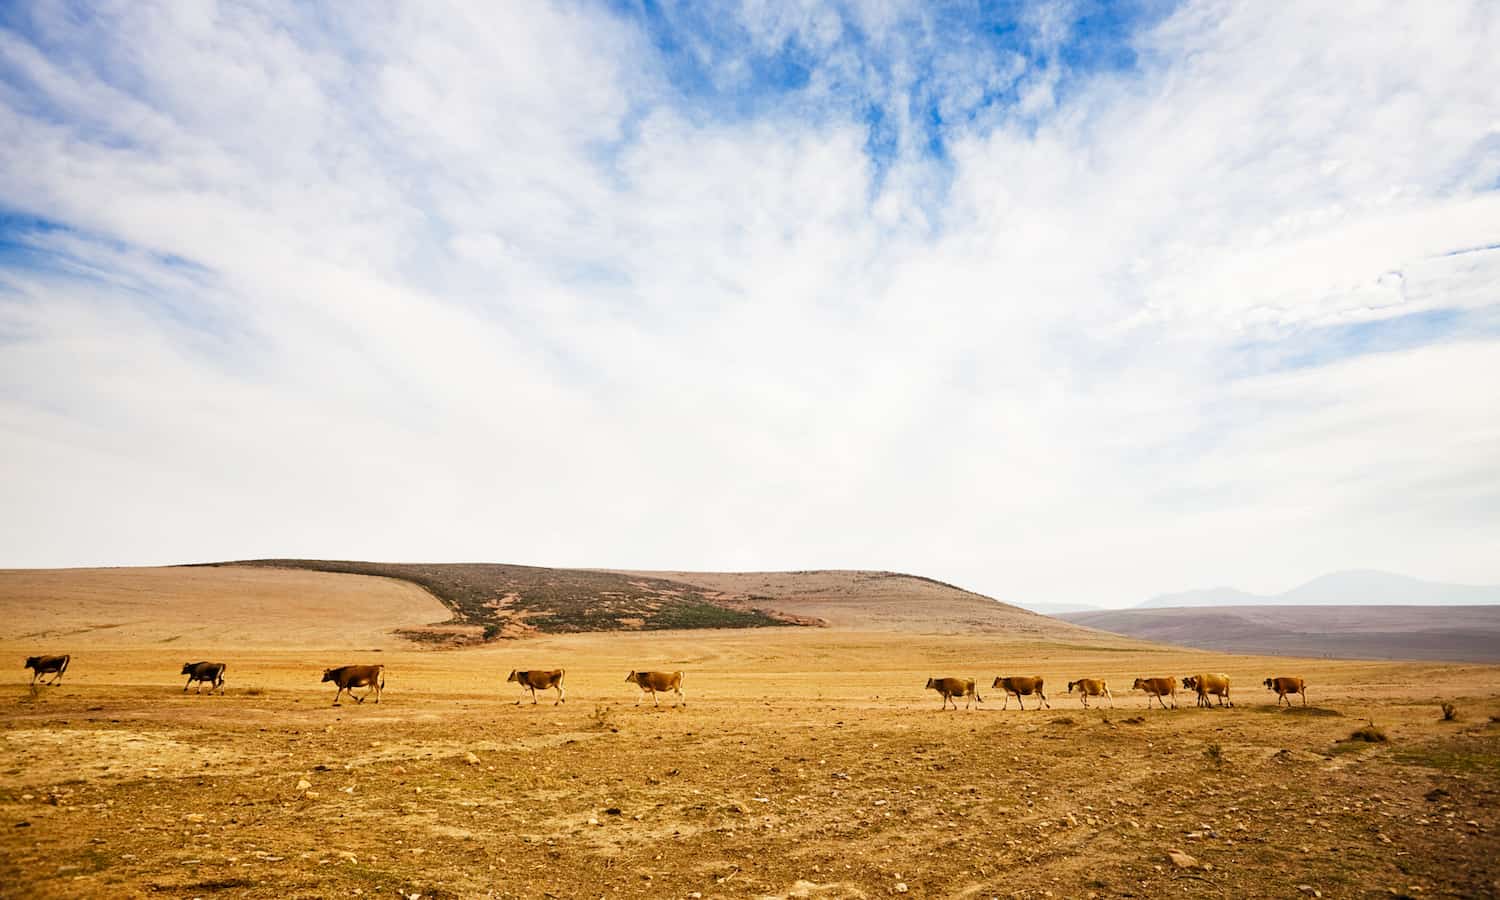 New Report: Meat and dairy industries have major impact on climate change